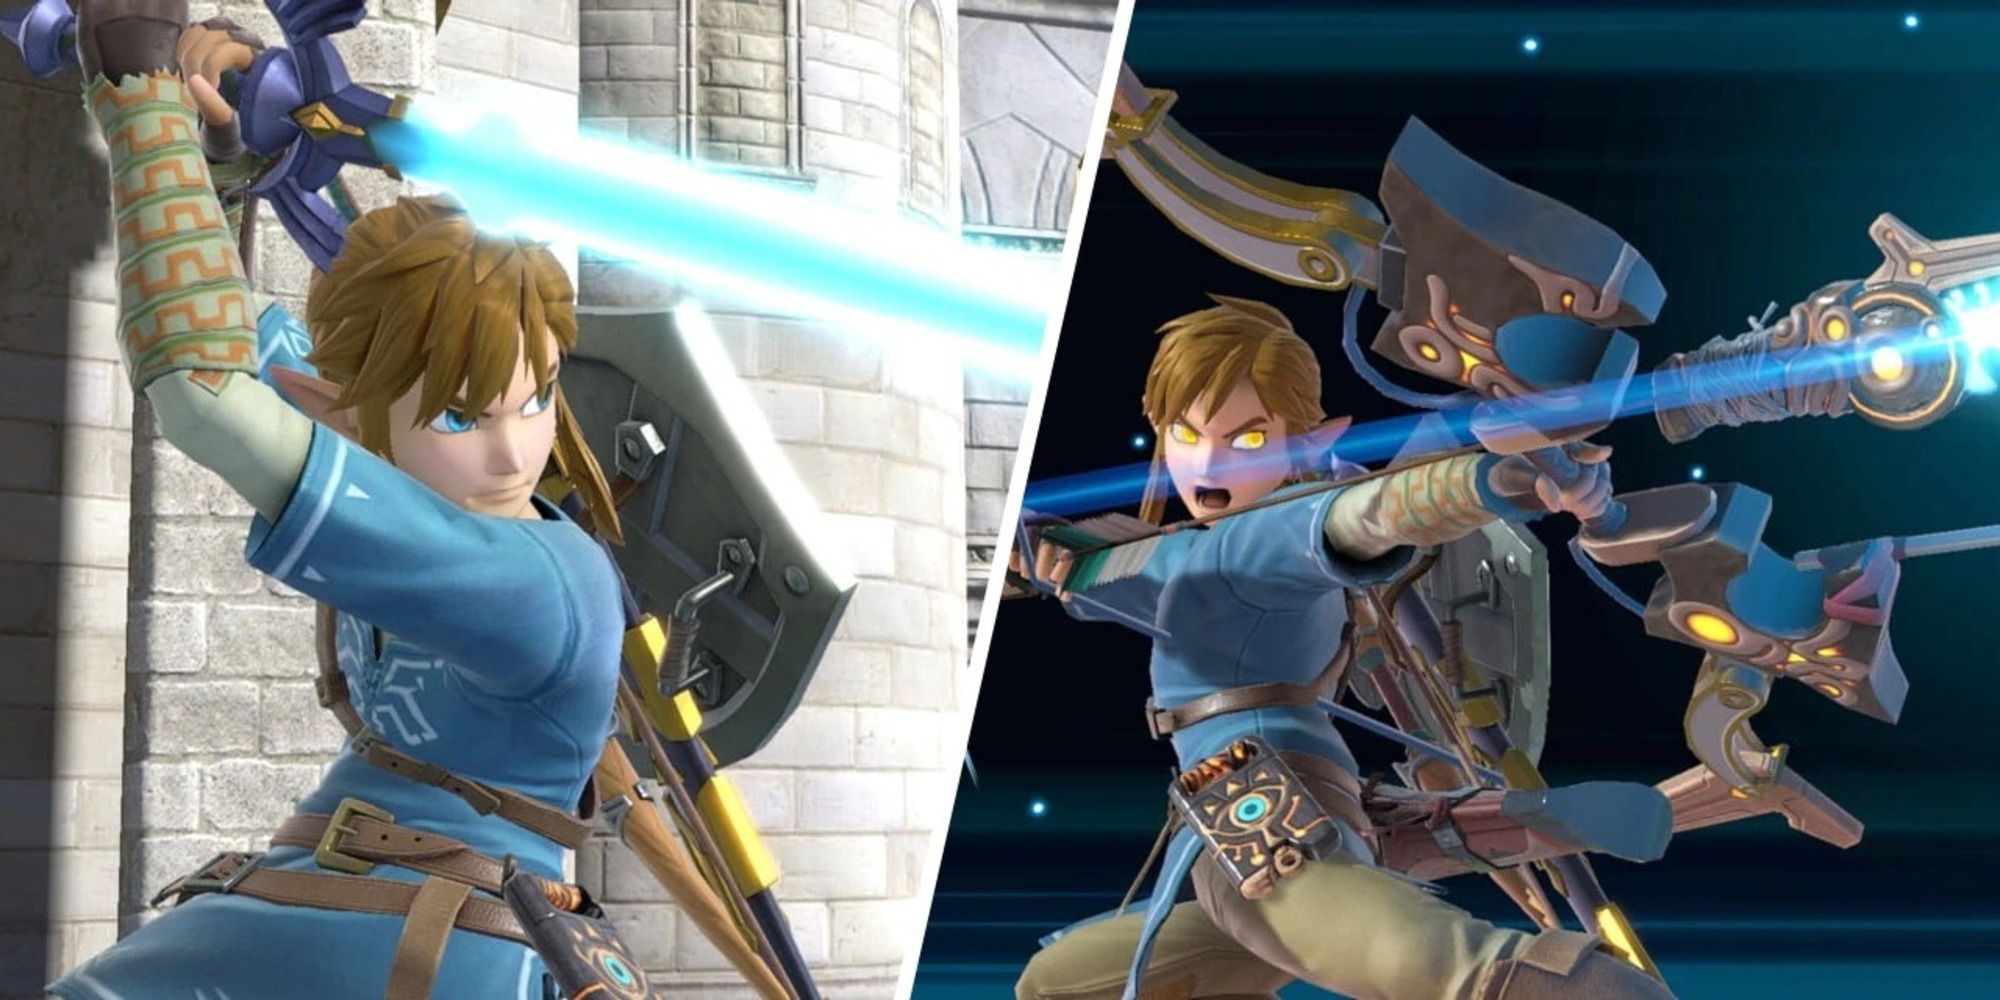 Link charging an attack and using his Final Smash in Super Smash Bros. Ultimate.